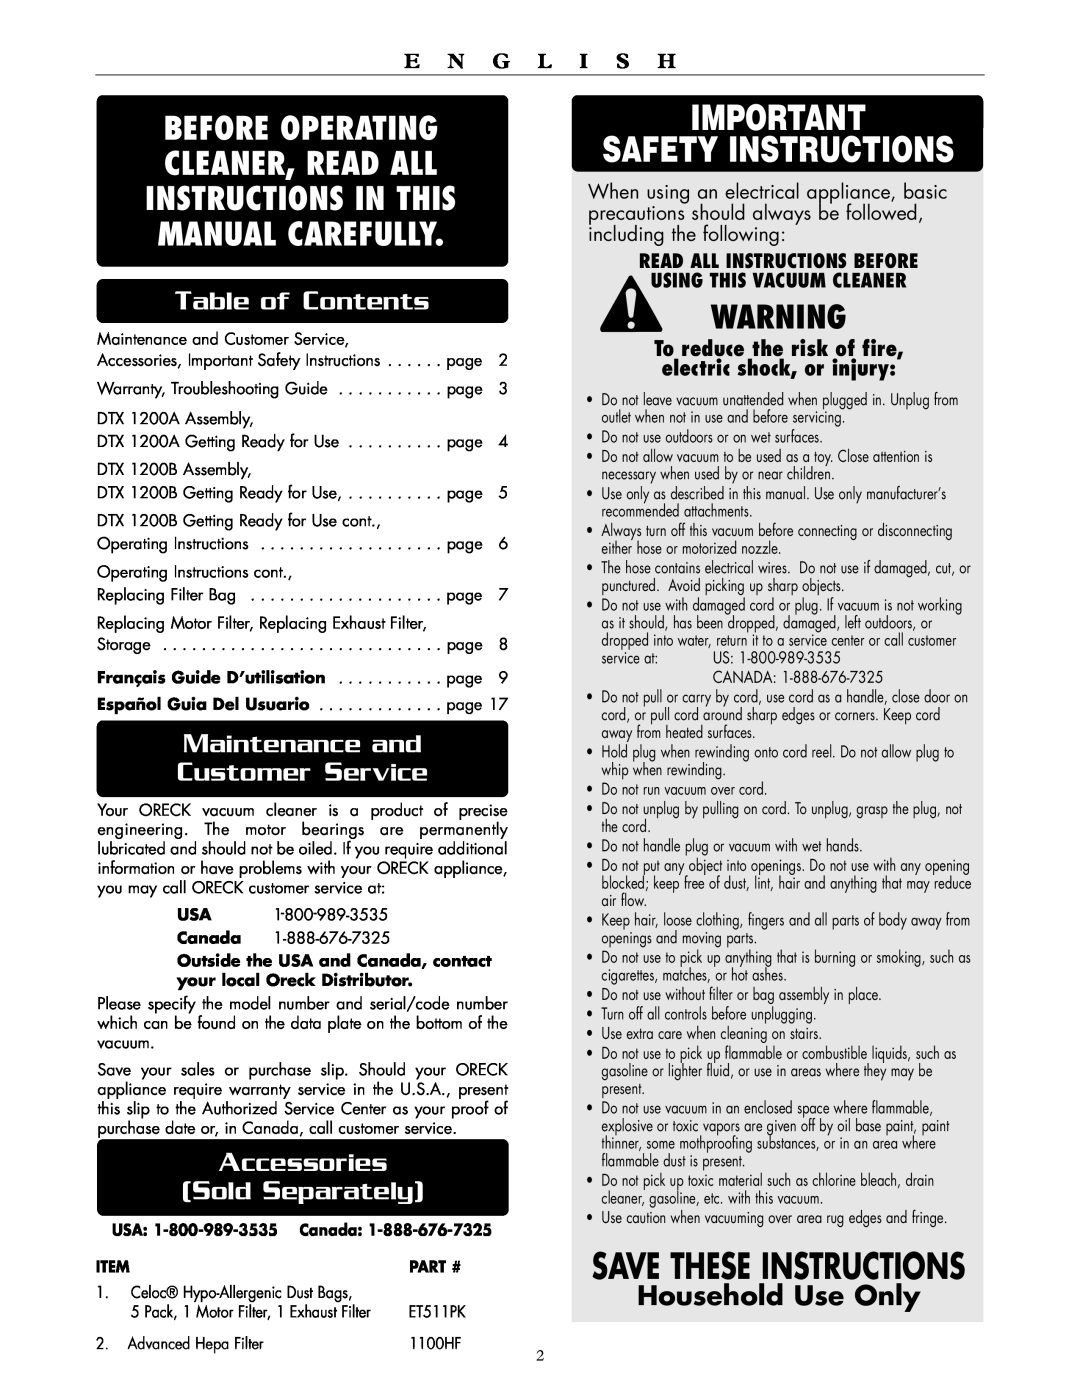 Oreck DTX 1200B Safety Instructions, Save These Instructions, Table of Contents, Maintenance and, Customer Service, Part # 